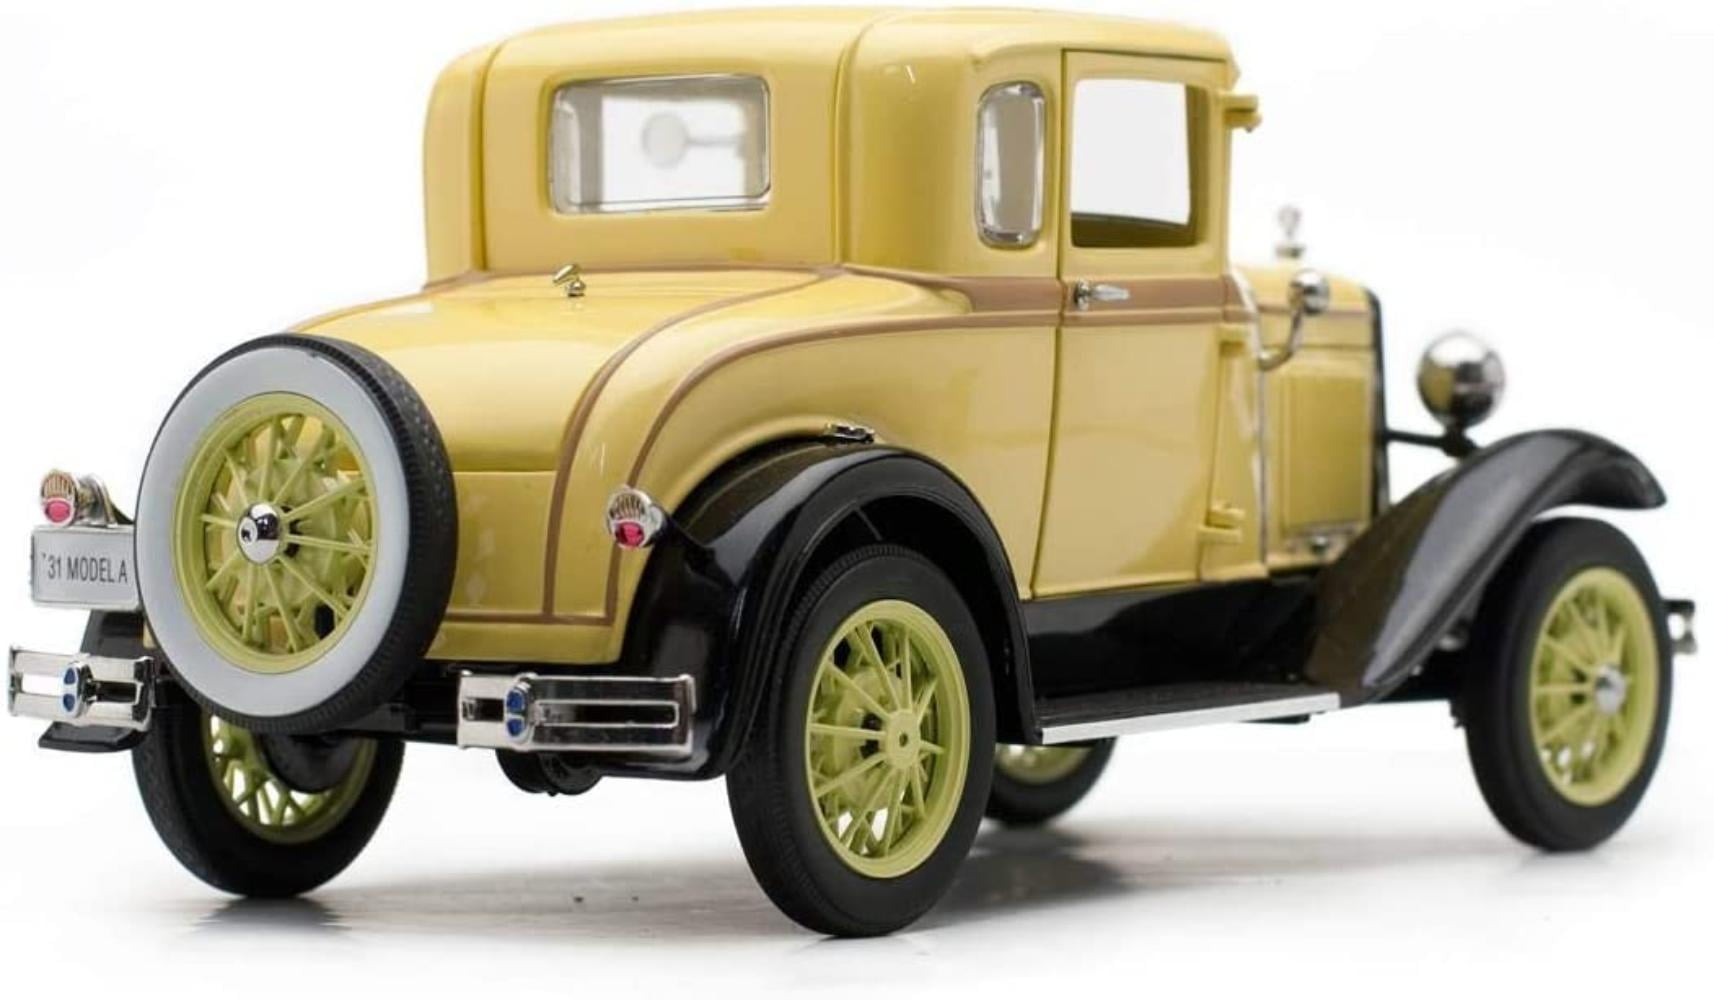 1931 FORD MODEL A COUPE BRONSON YELLOW 1/18 DIECAST MODEL CAR BY SUNSTAR 6135 